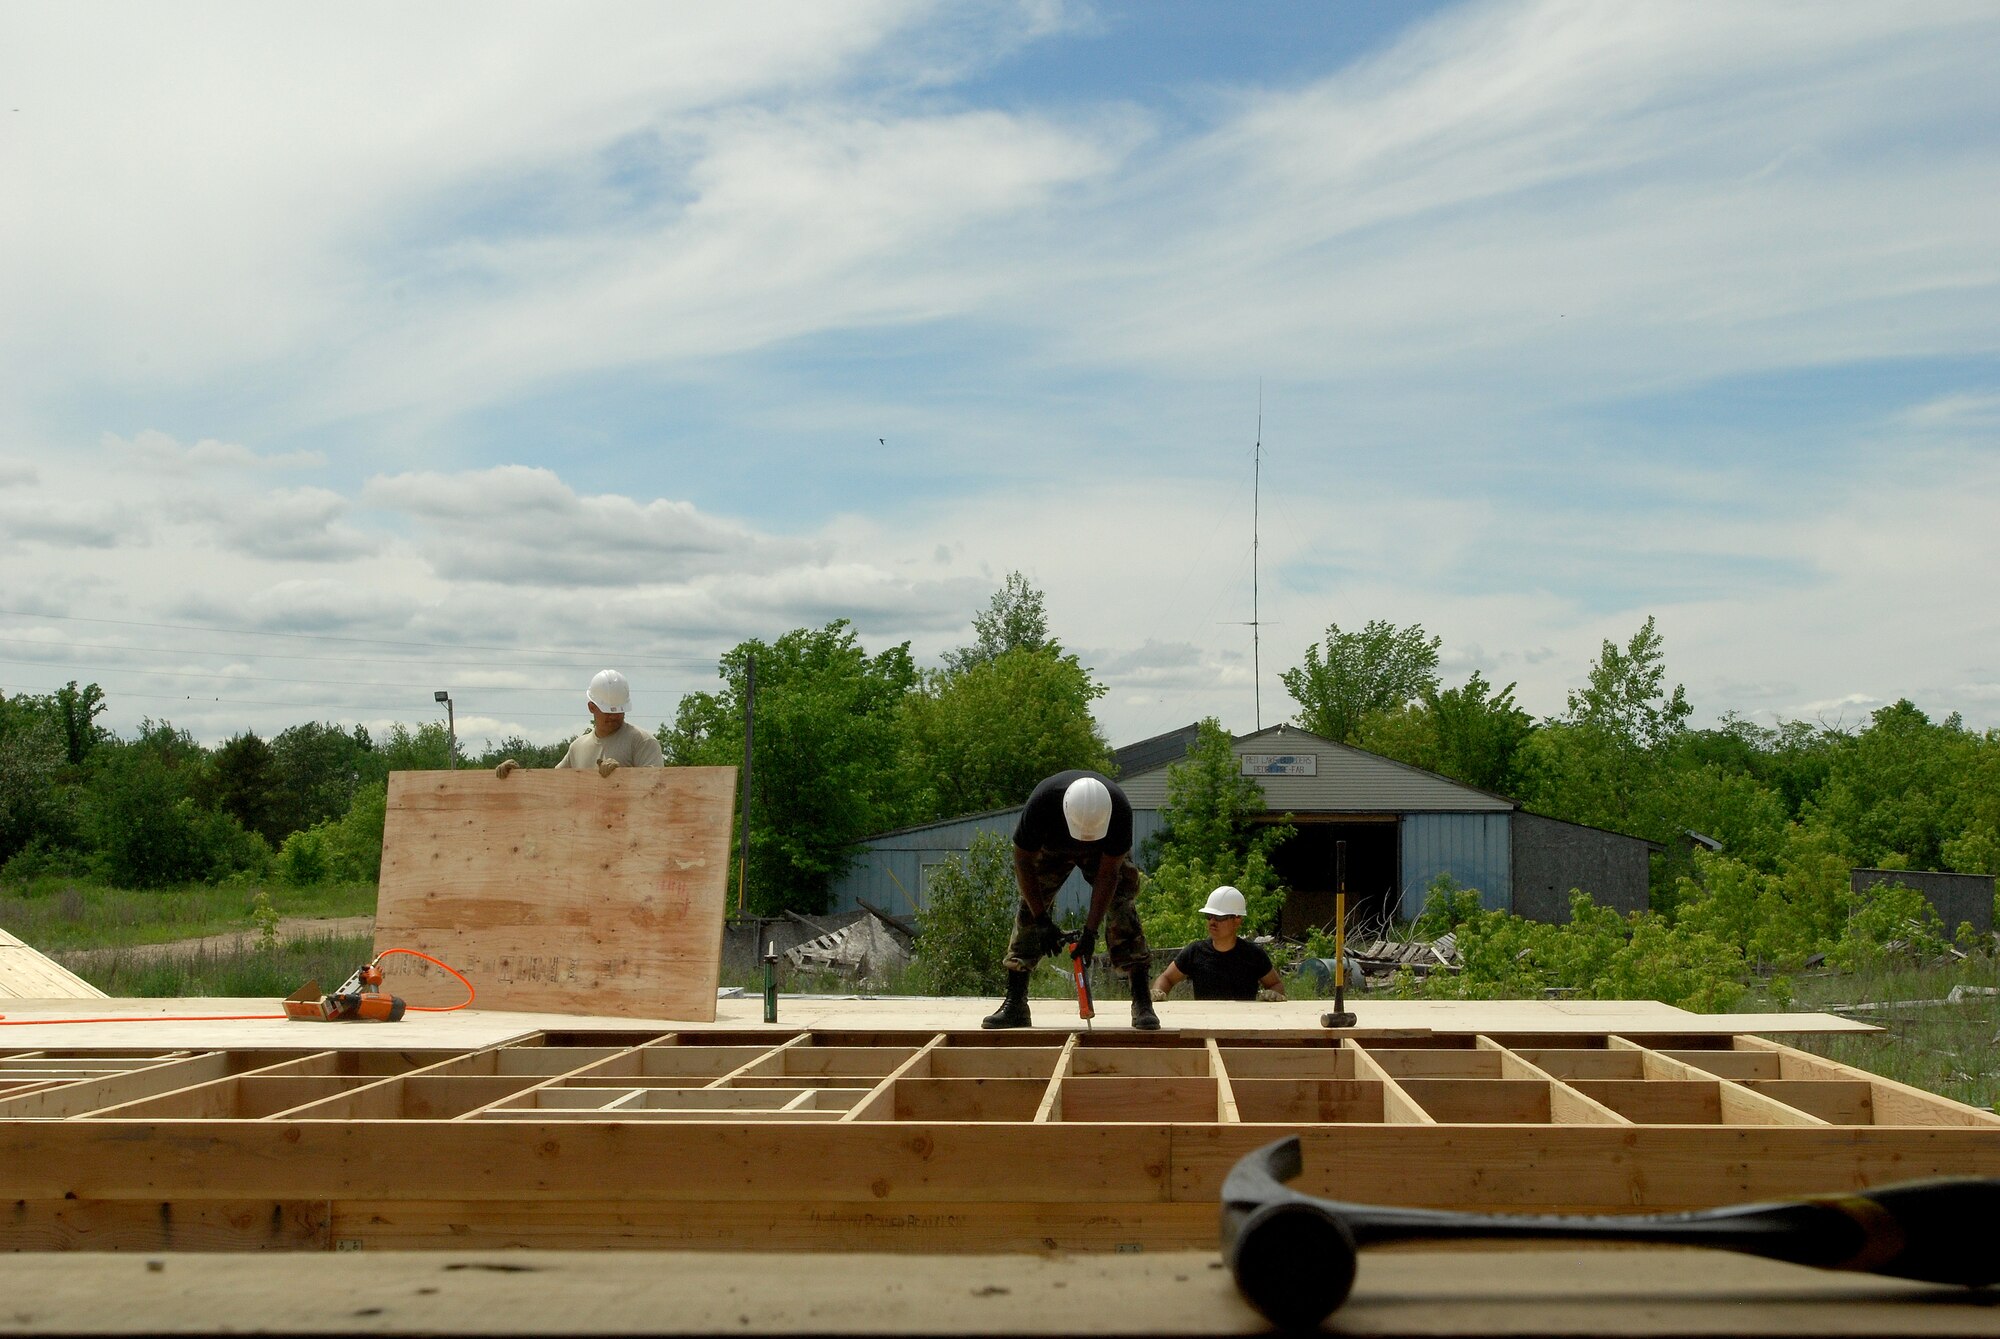 Members of the 433rd Civil Engineering Squadron conduct a humanitarian mission in the Red Lake Indian Reservation for the Red Lake band of Chippewa Indians, just outside of Bemidji, Minnesota. Building the subfloor of what will become a two-bedroom home.(U.S. Air Force photo/Airman 1st Class Brian McGloin)